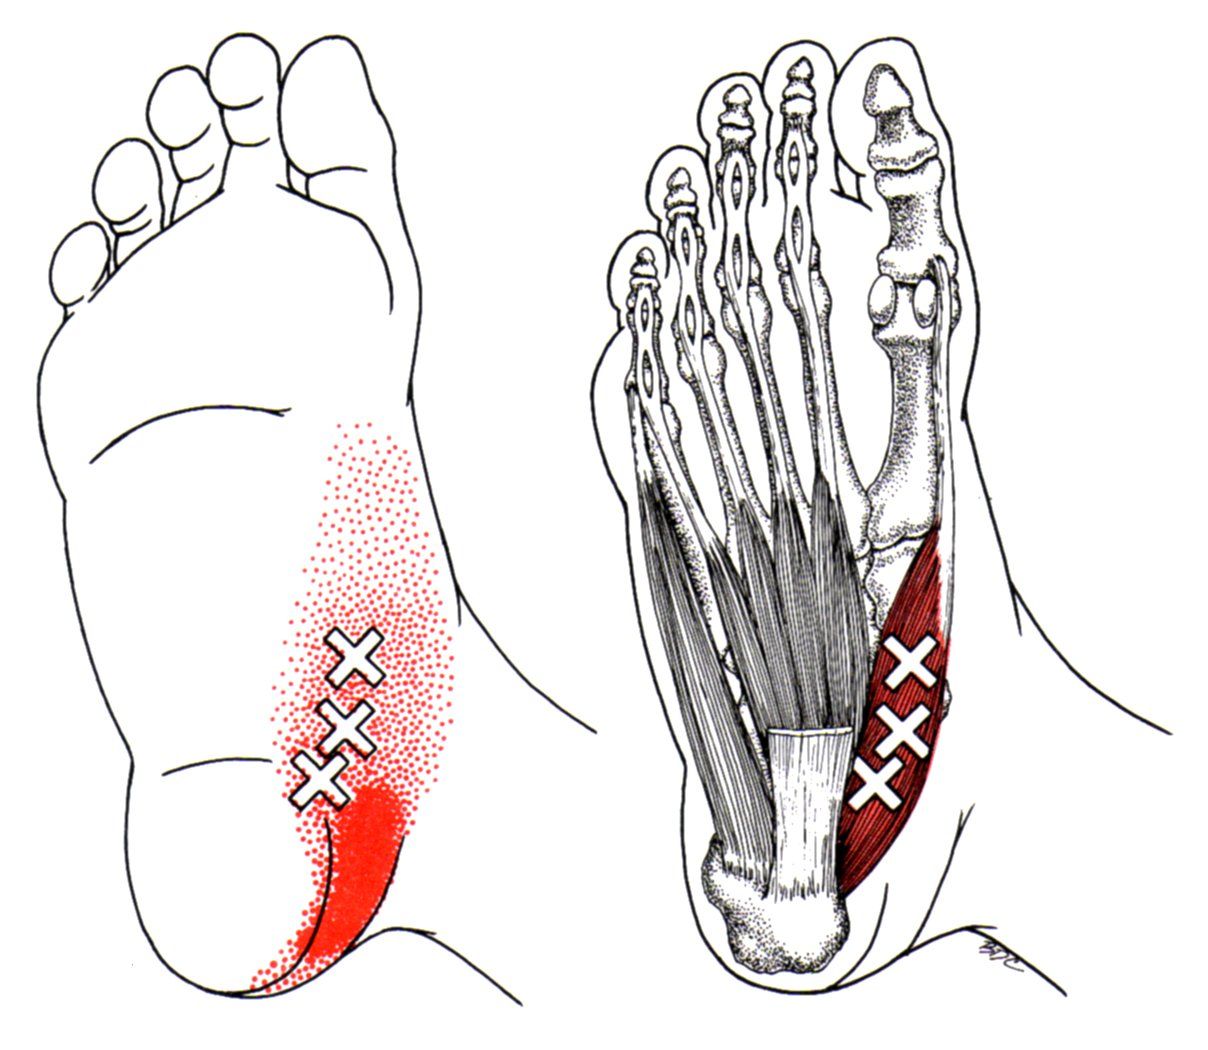 Foot pain? Intrinsic muscles trigger points? Try West Suburban Pain Relief!